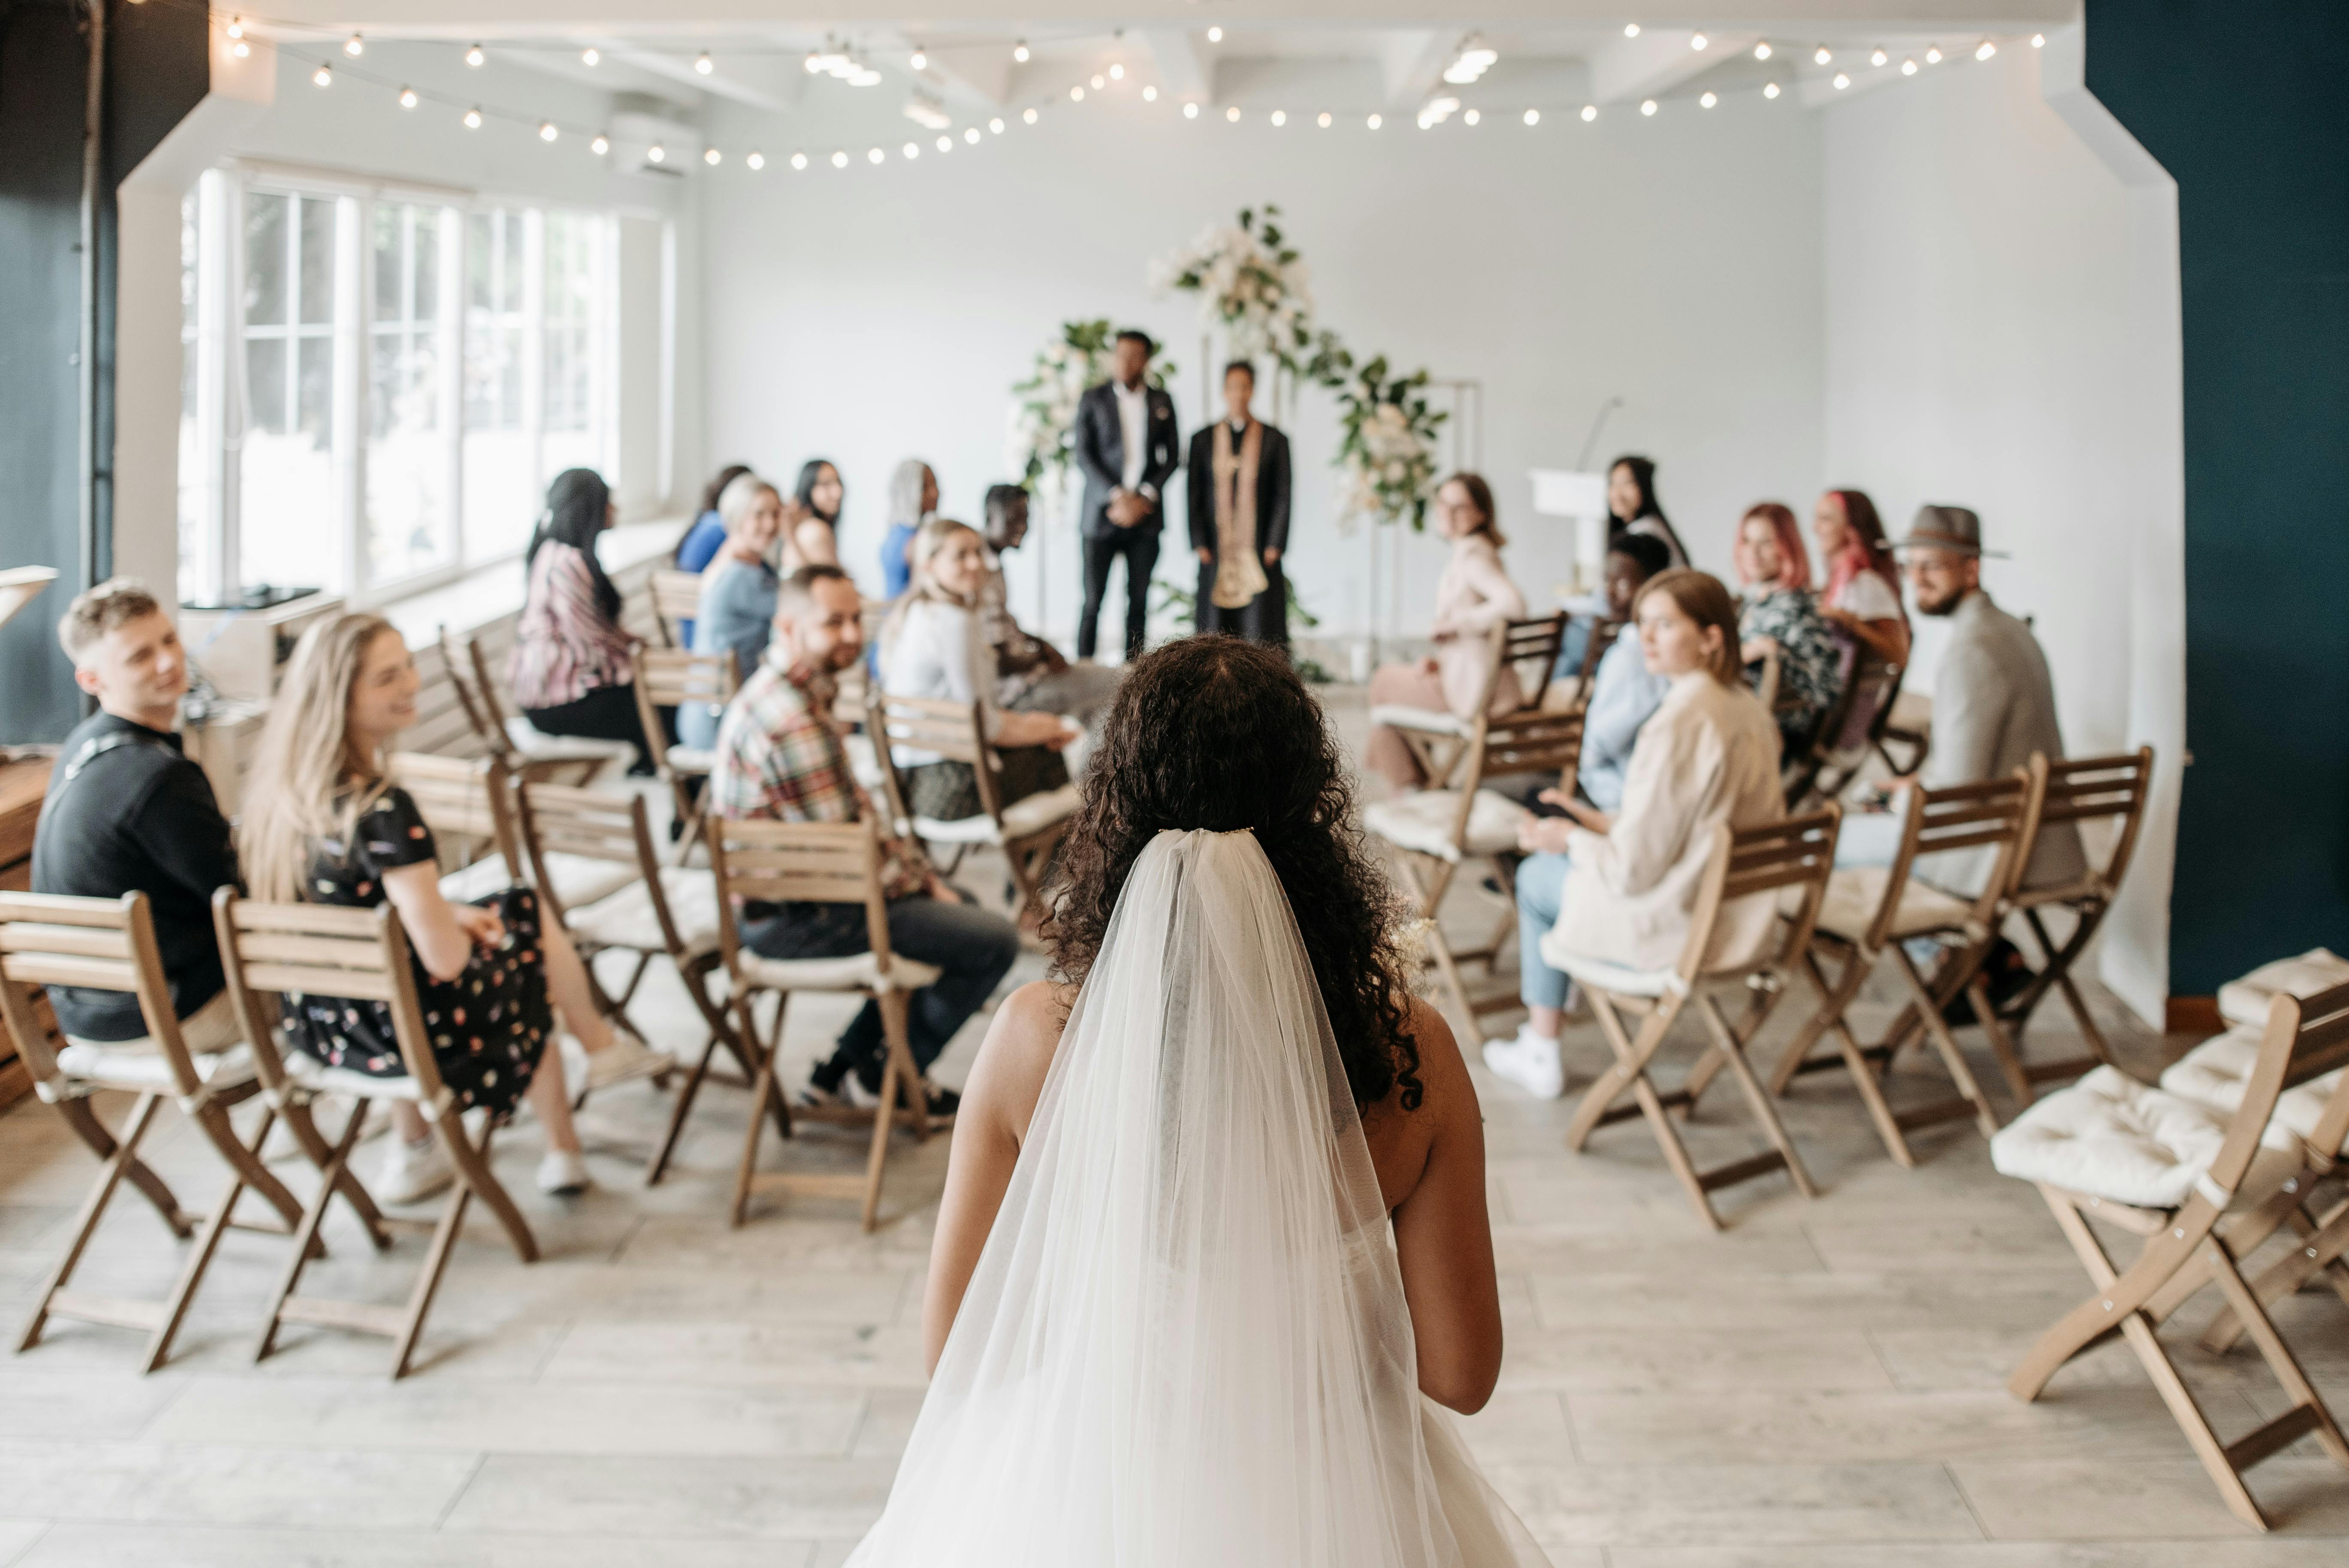 A bride and her wedding guests | Source: Pexels